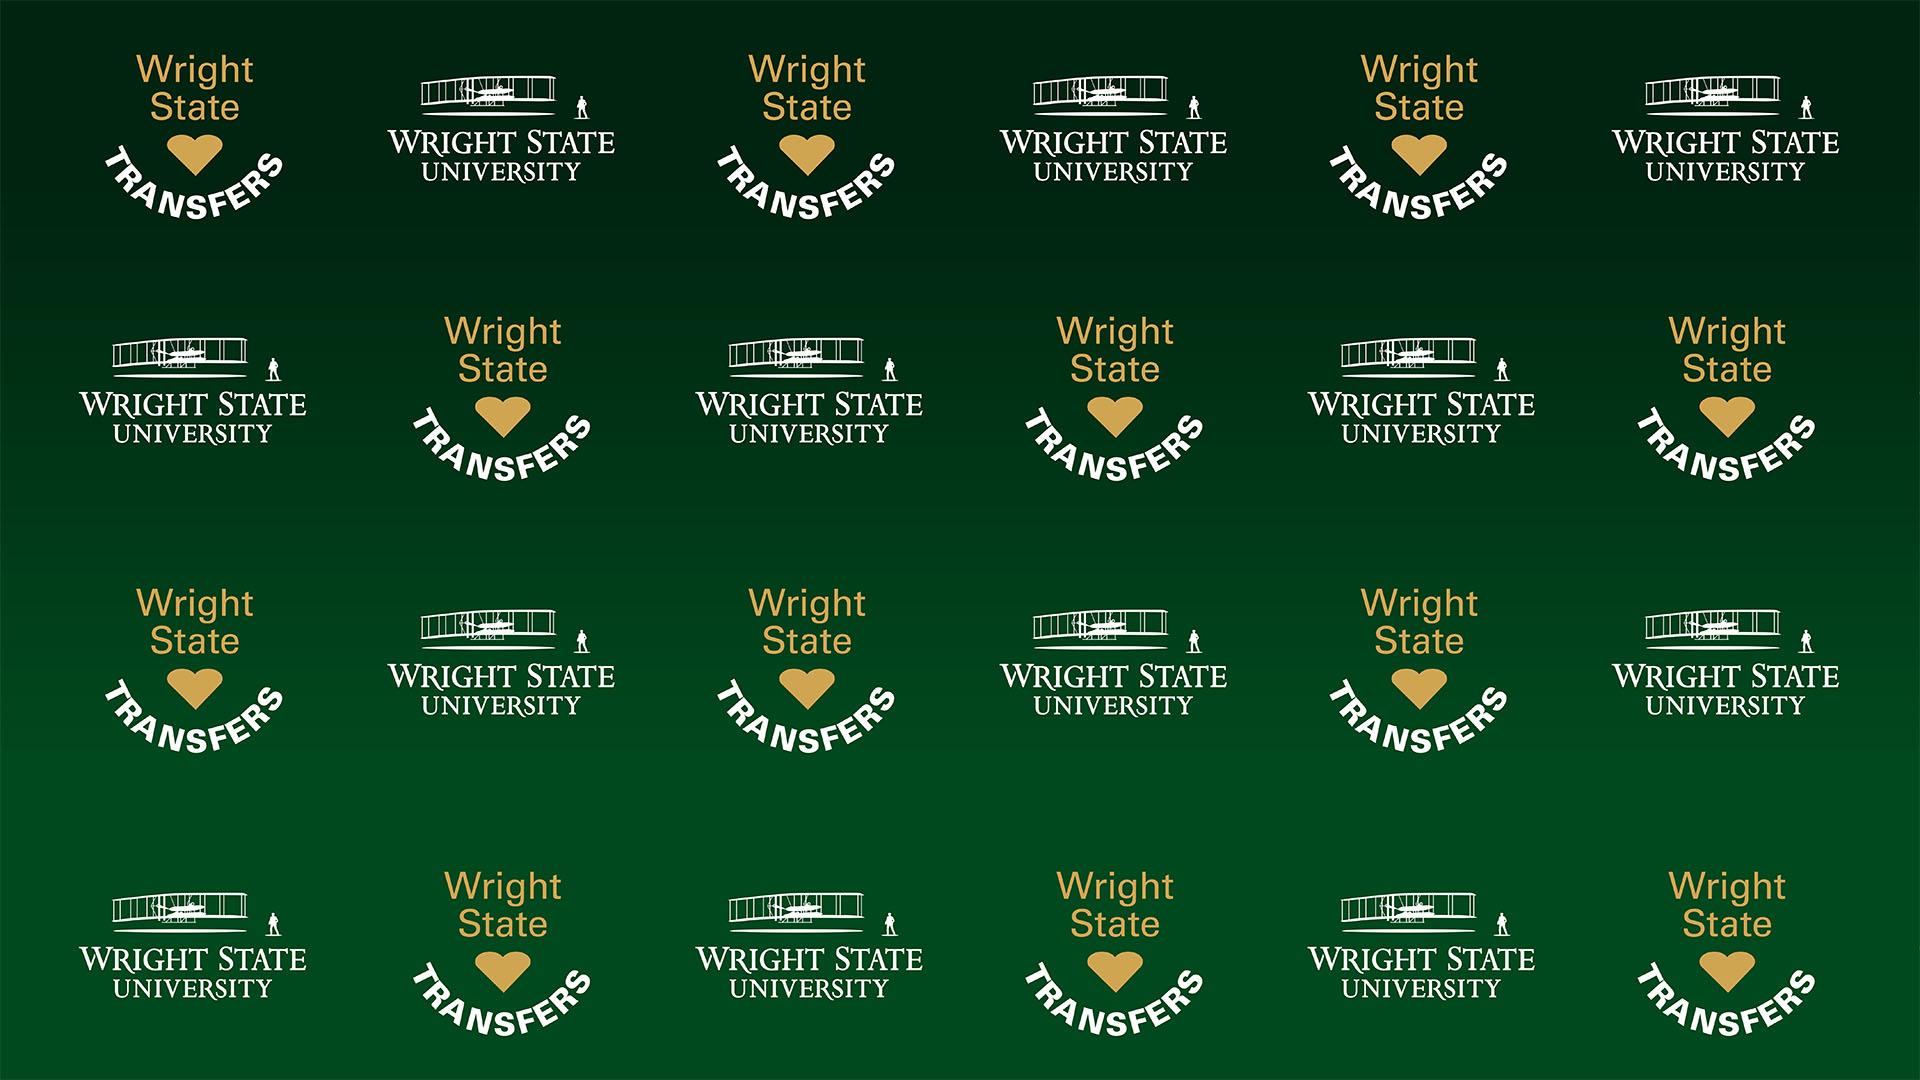 video conference background with wright state logo and wright state loves transfers graphic